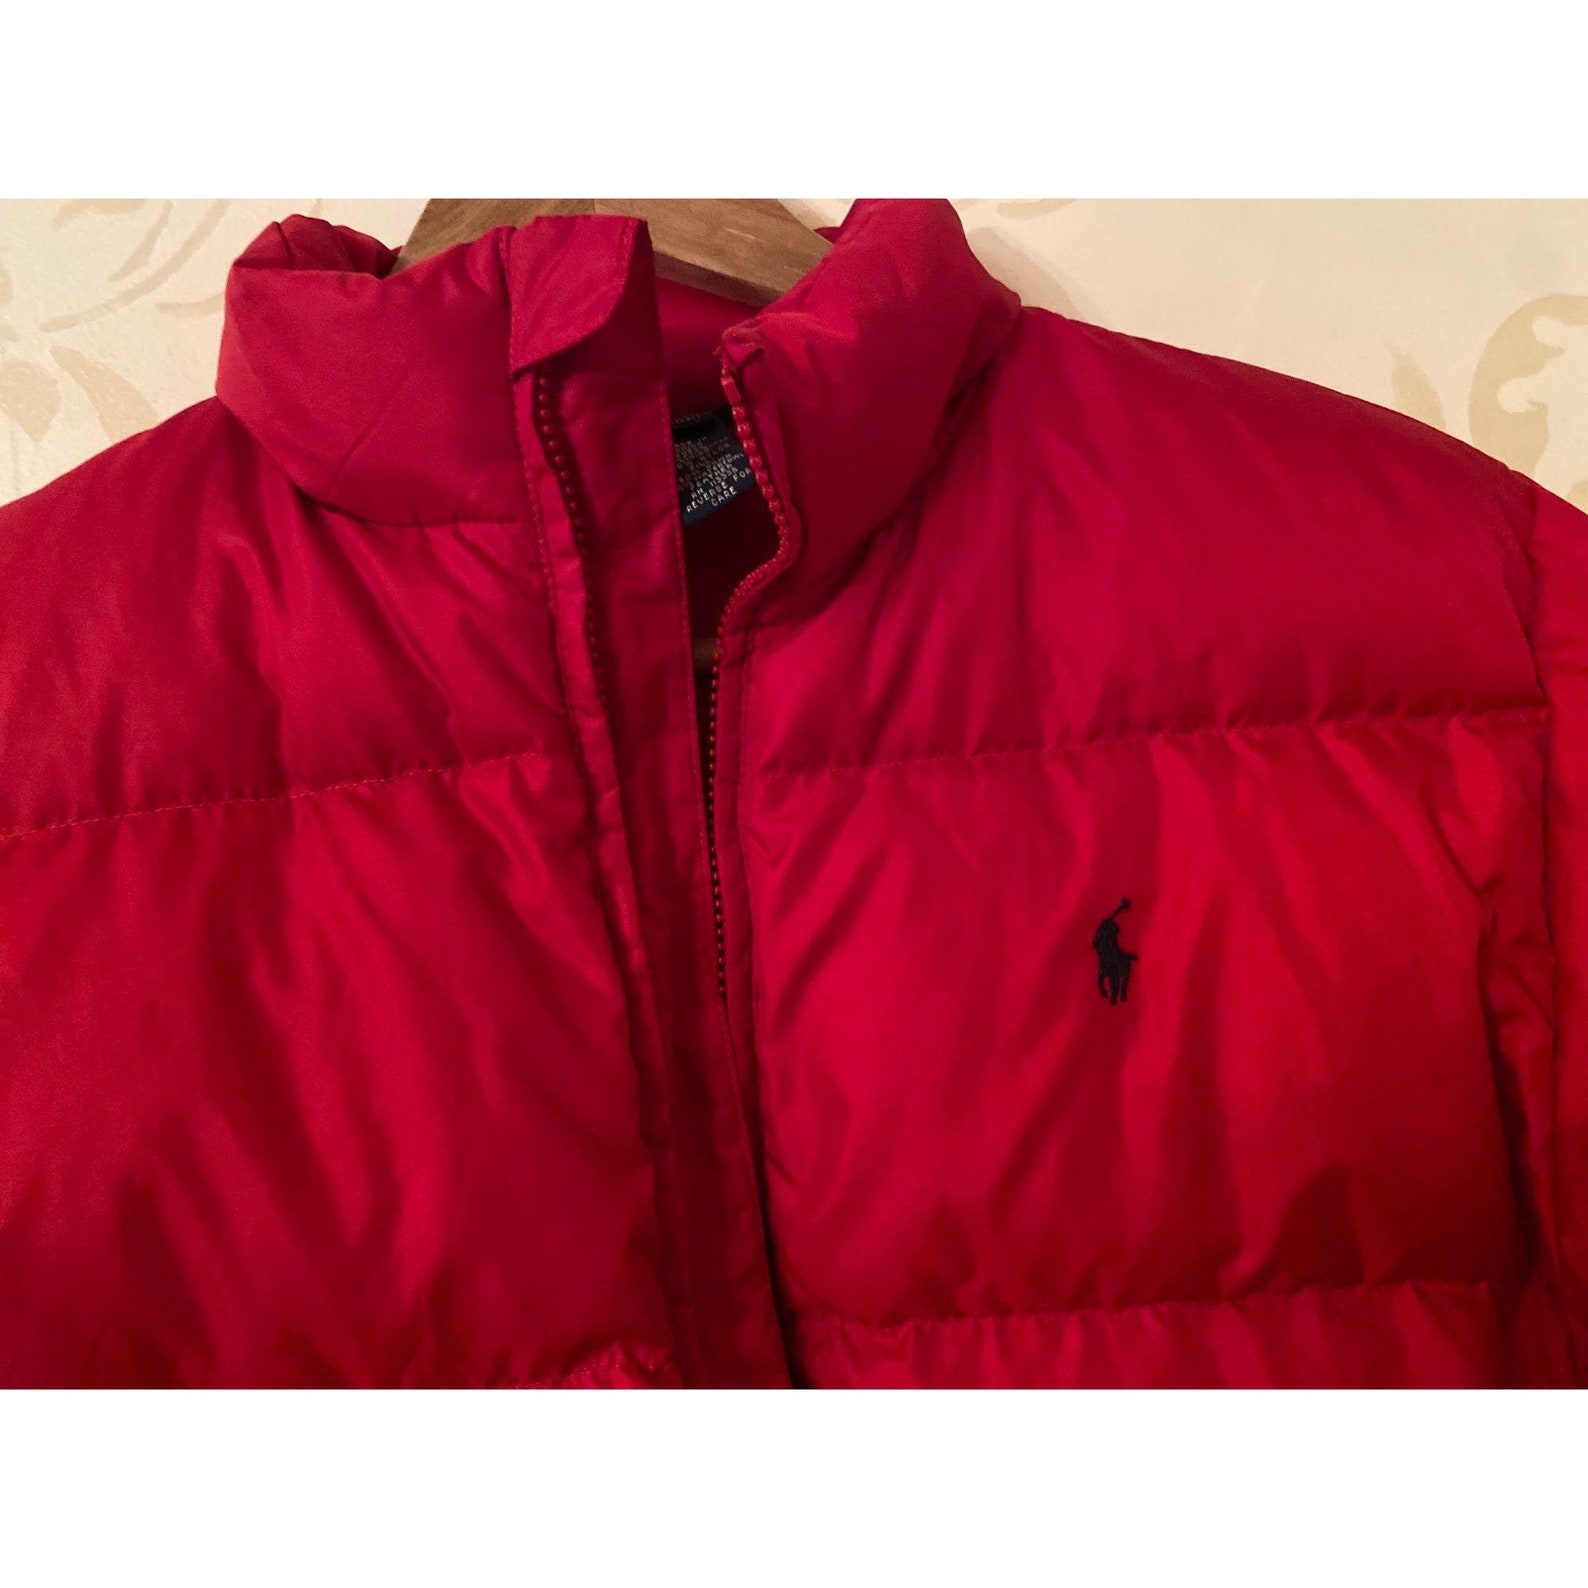 Polo Ralph Lauren Red Puffer Down Jacket Boys 16-18 | Etsy